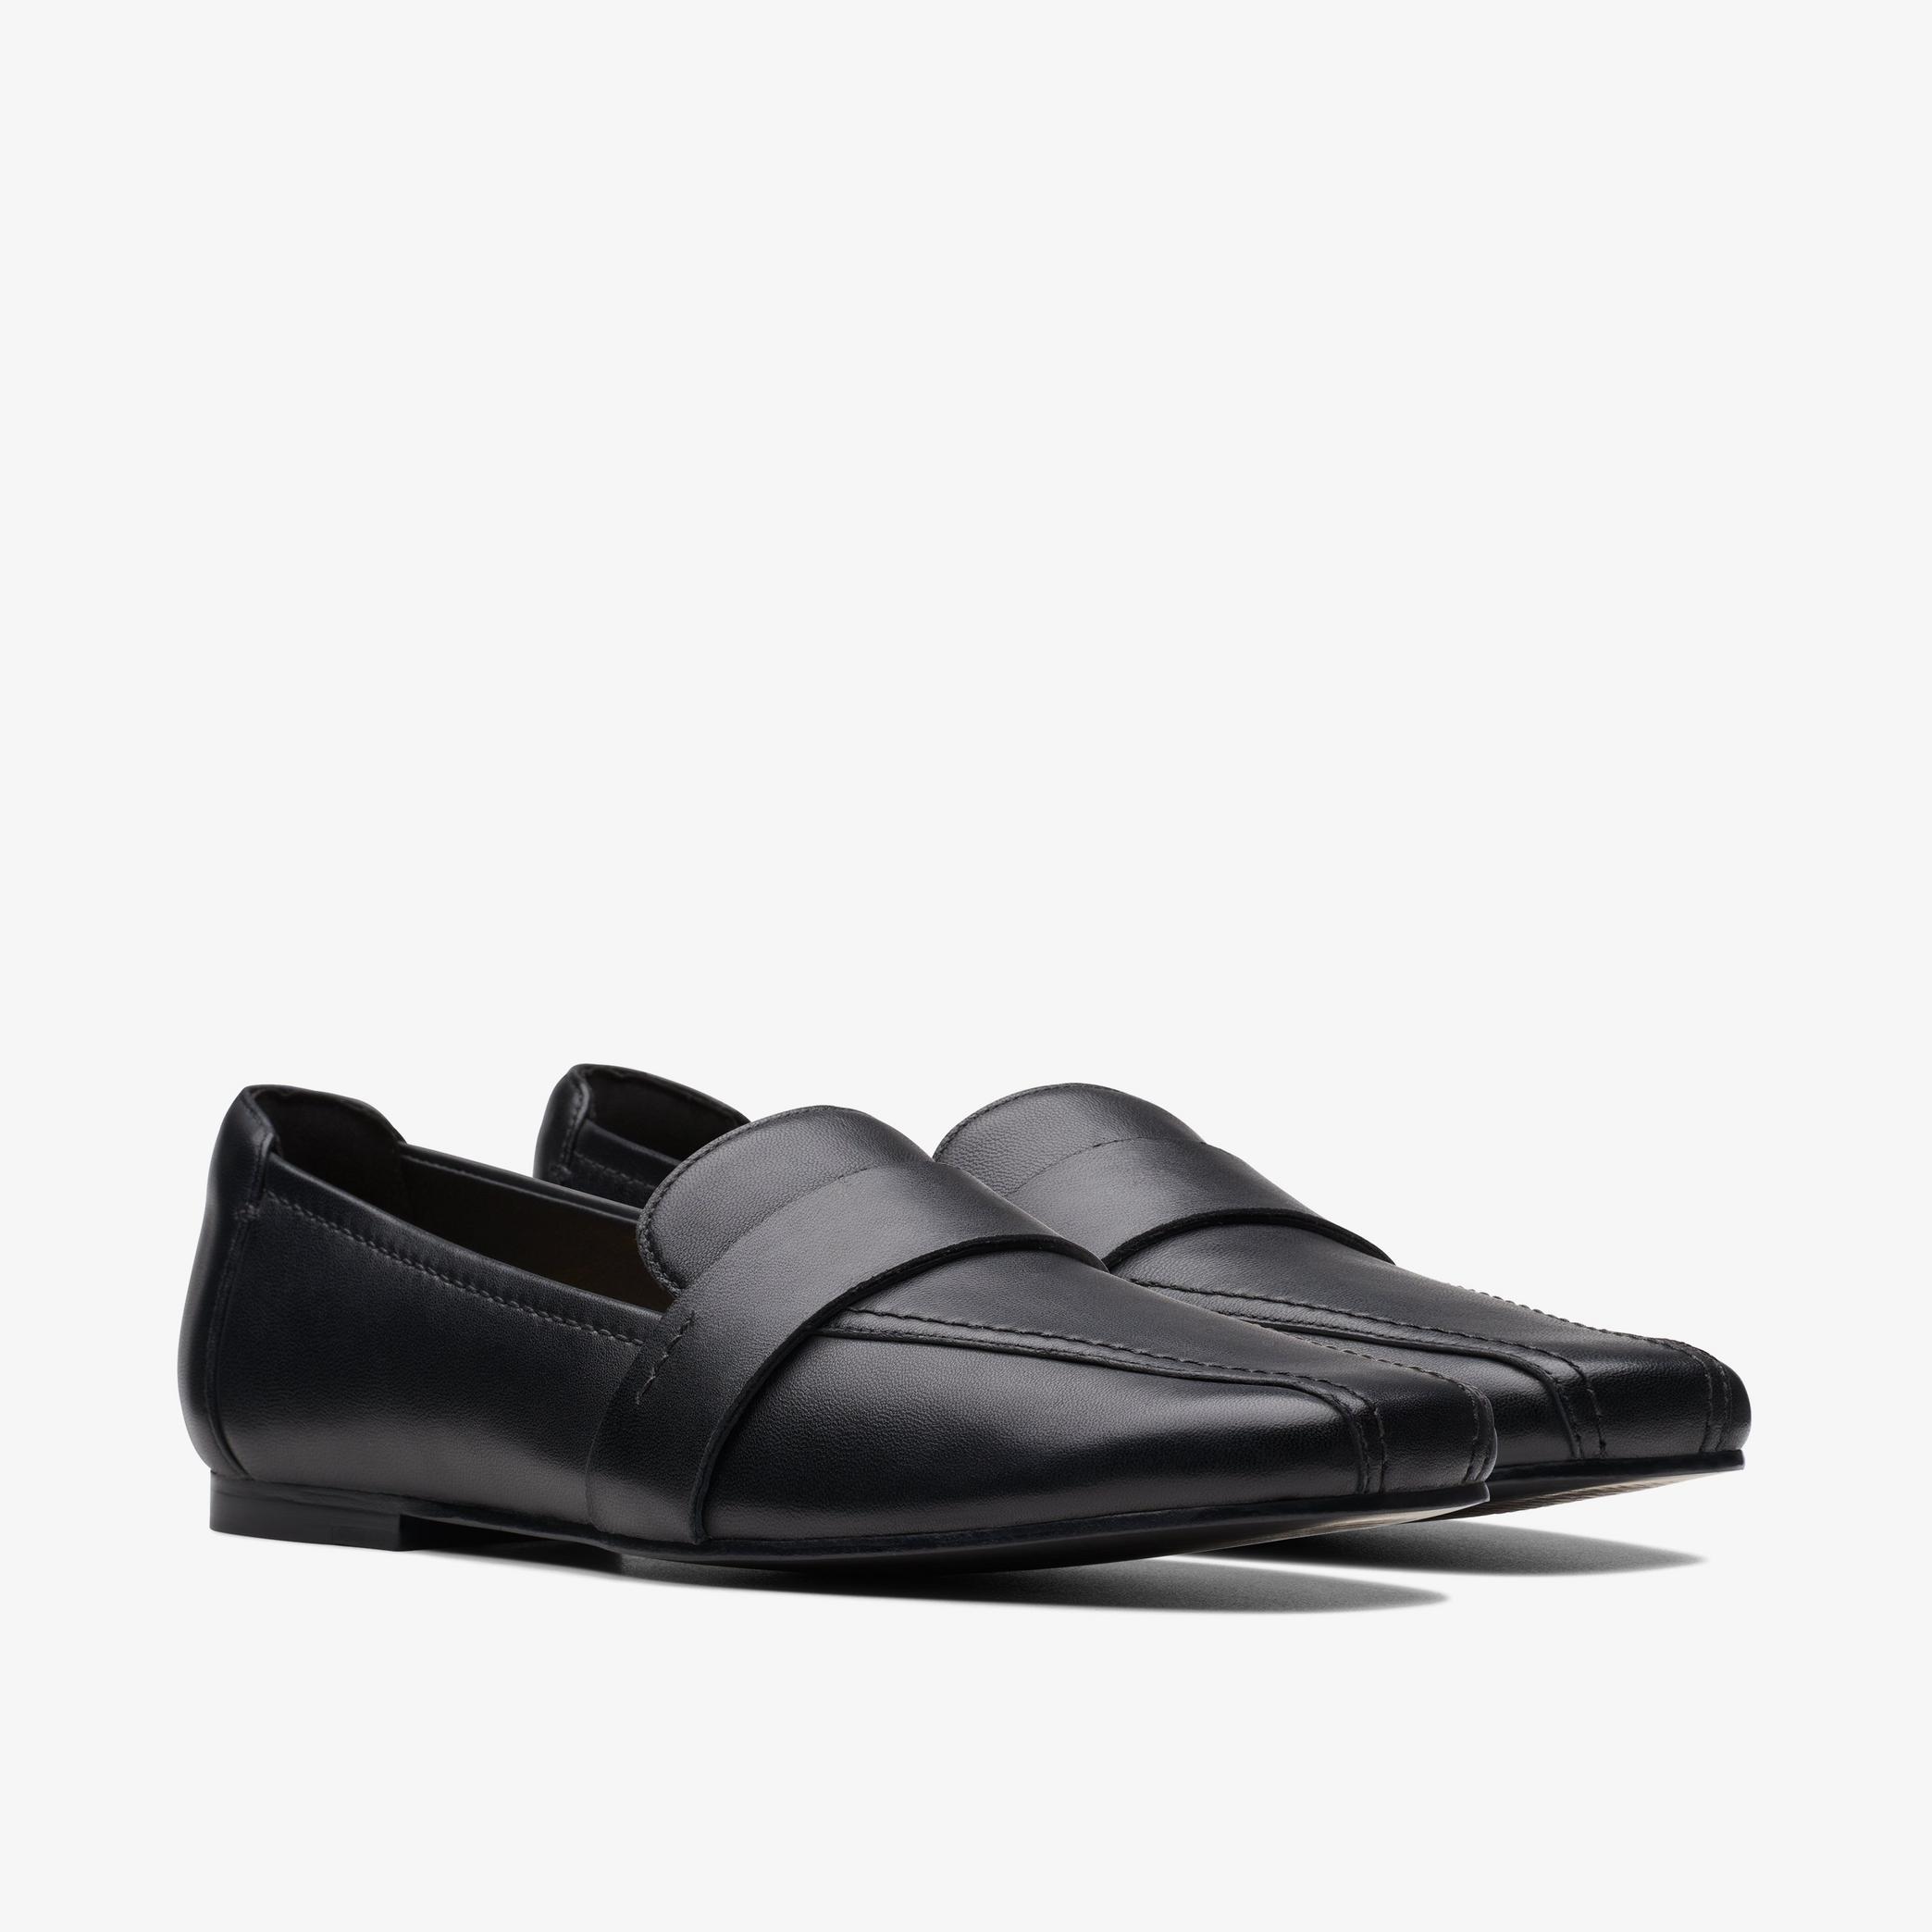 Seren Flat Black Leather Loafers, view 4 of 6